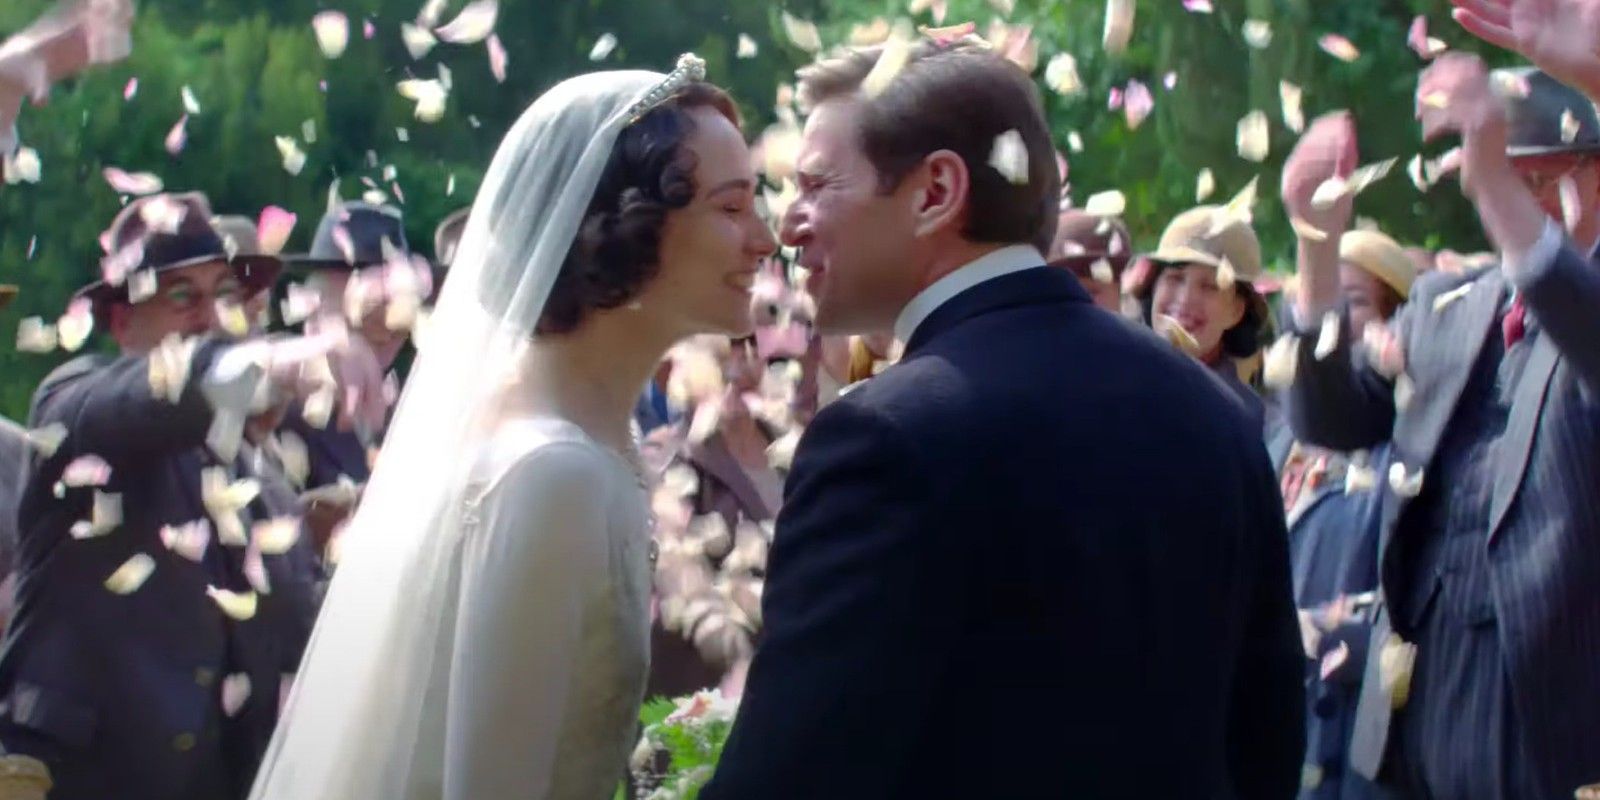 Tom and Lucy's wedding in Downton Abbey: A New Era